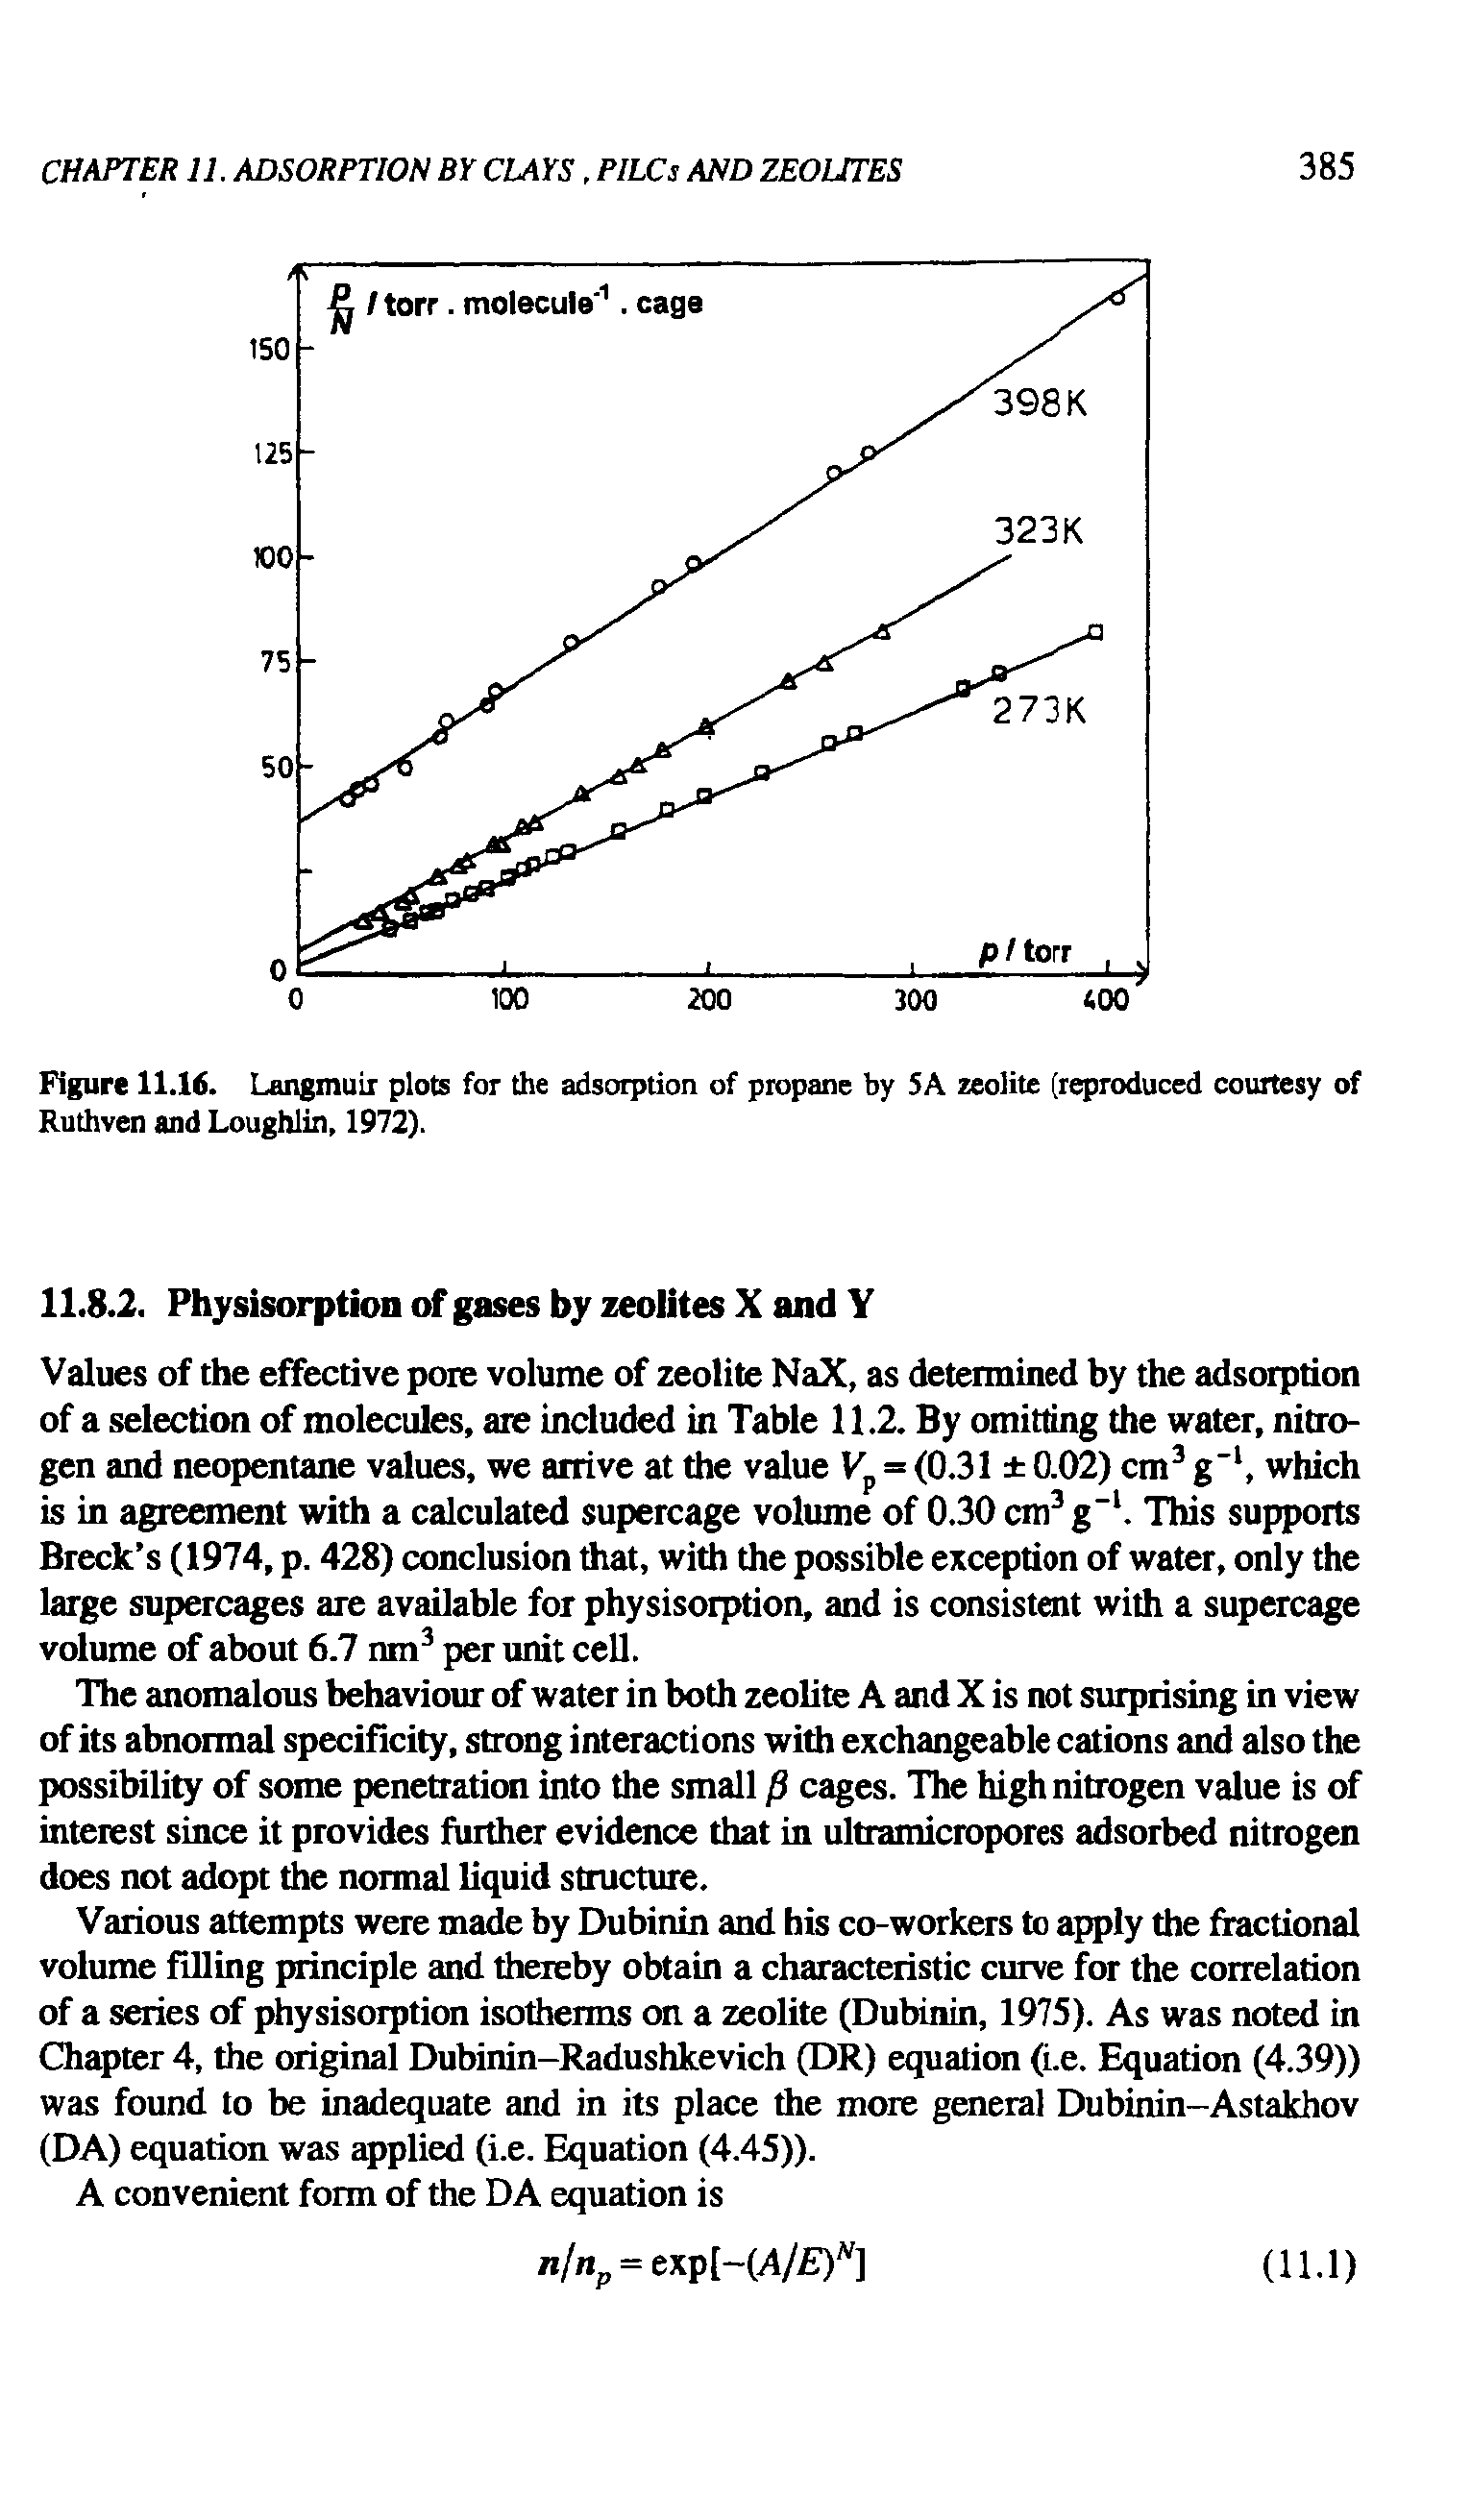 Figure 11.16. Langmuir plots for the adsorption of propane by 5A zeolite (reproduced courtesy of Ruthven and Loughlin, 1972).